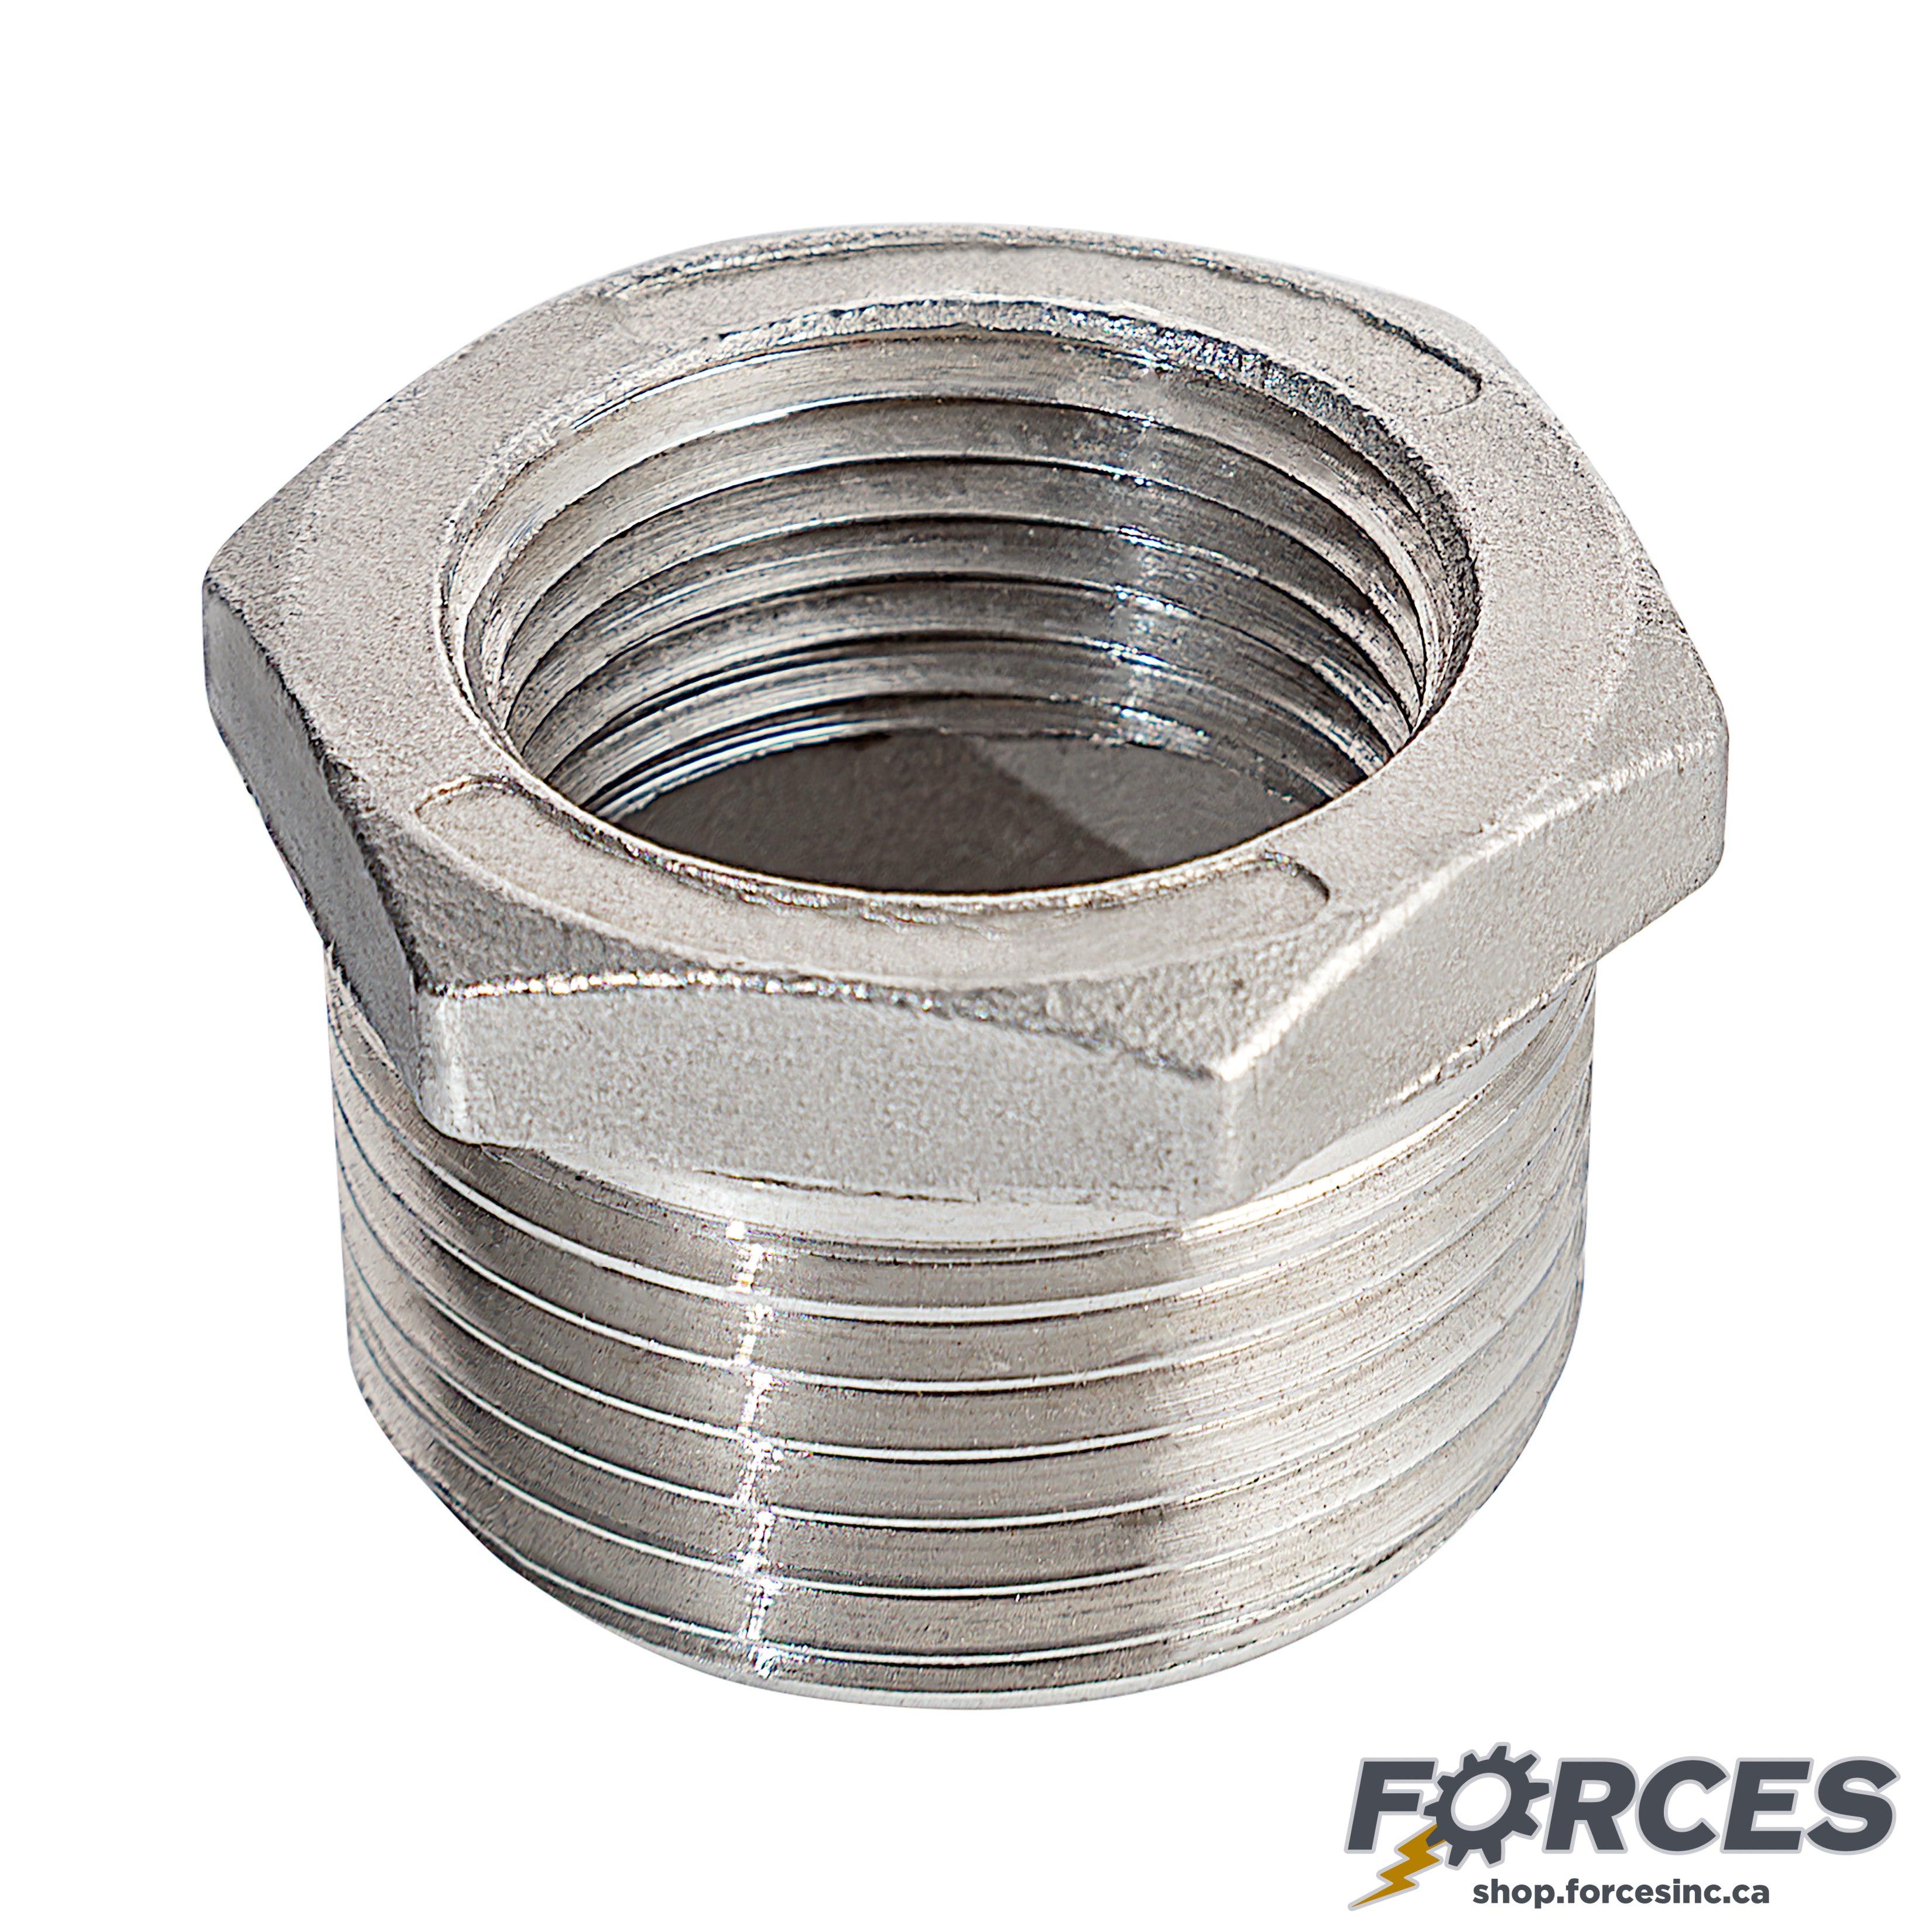 1/2" (M) x 1/4" (F) Reducing Hex Bushing NPT #150 - Stainless Steel 316 - Forces Inc